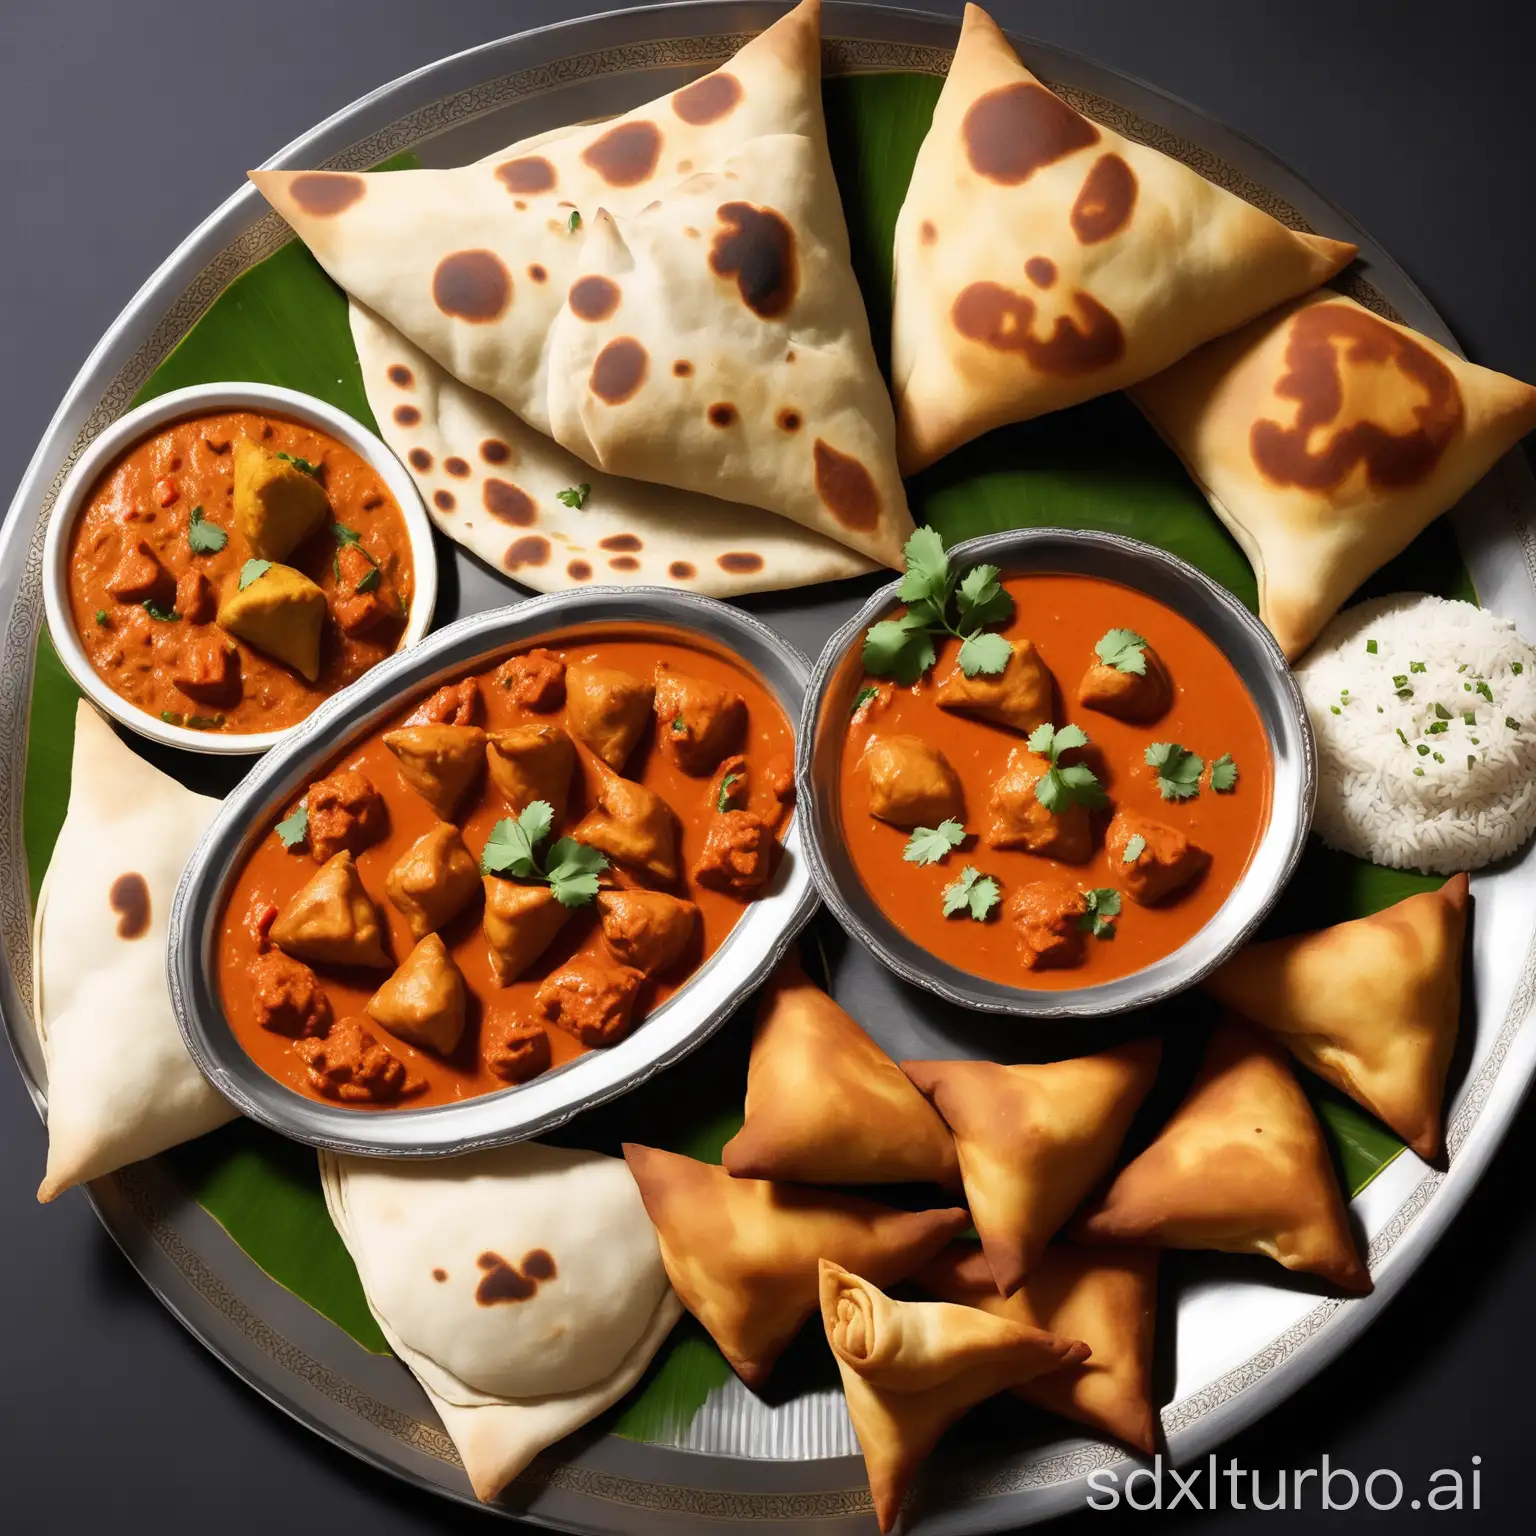 A plate of different traditional Indian dishes, such as chicken tikka masala, samosas, and naan. The dishes are arranged in an appetizing way, and the image is taken from a high angle to make the food look even more delicious.
